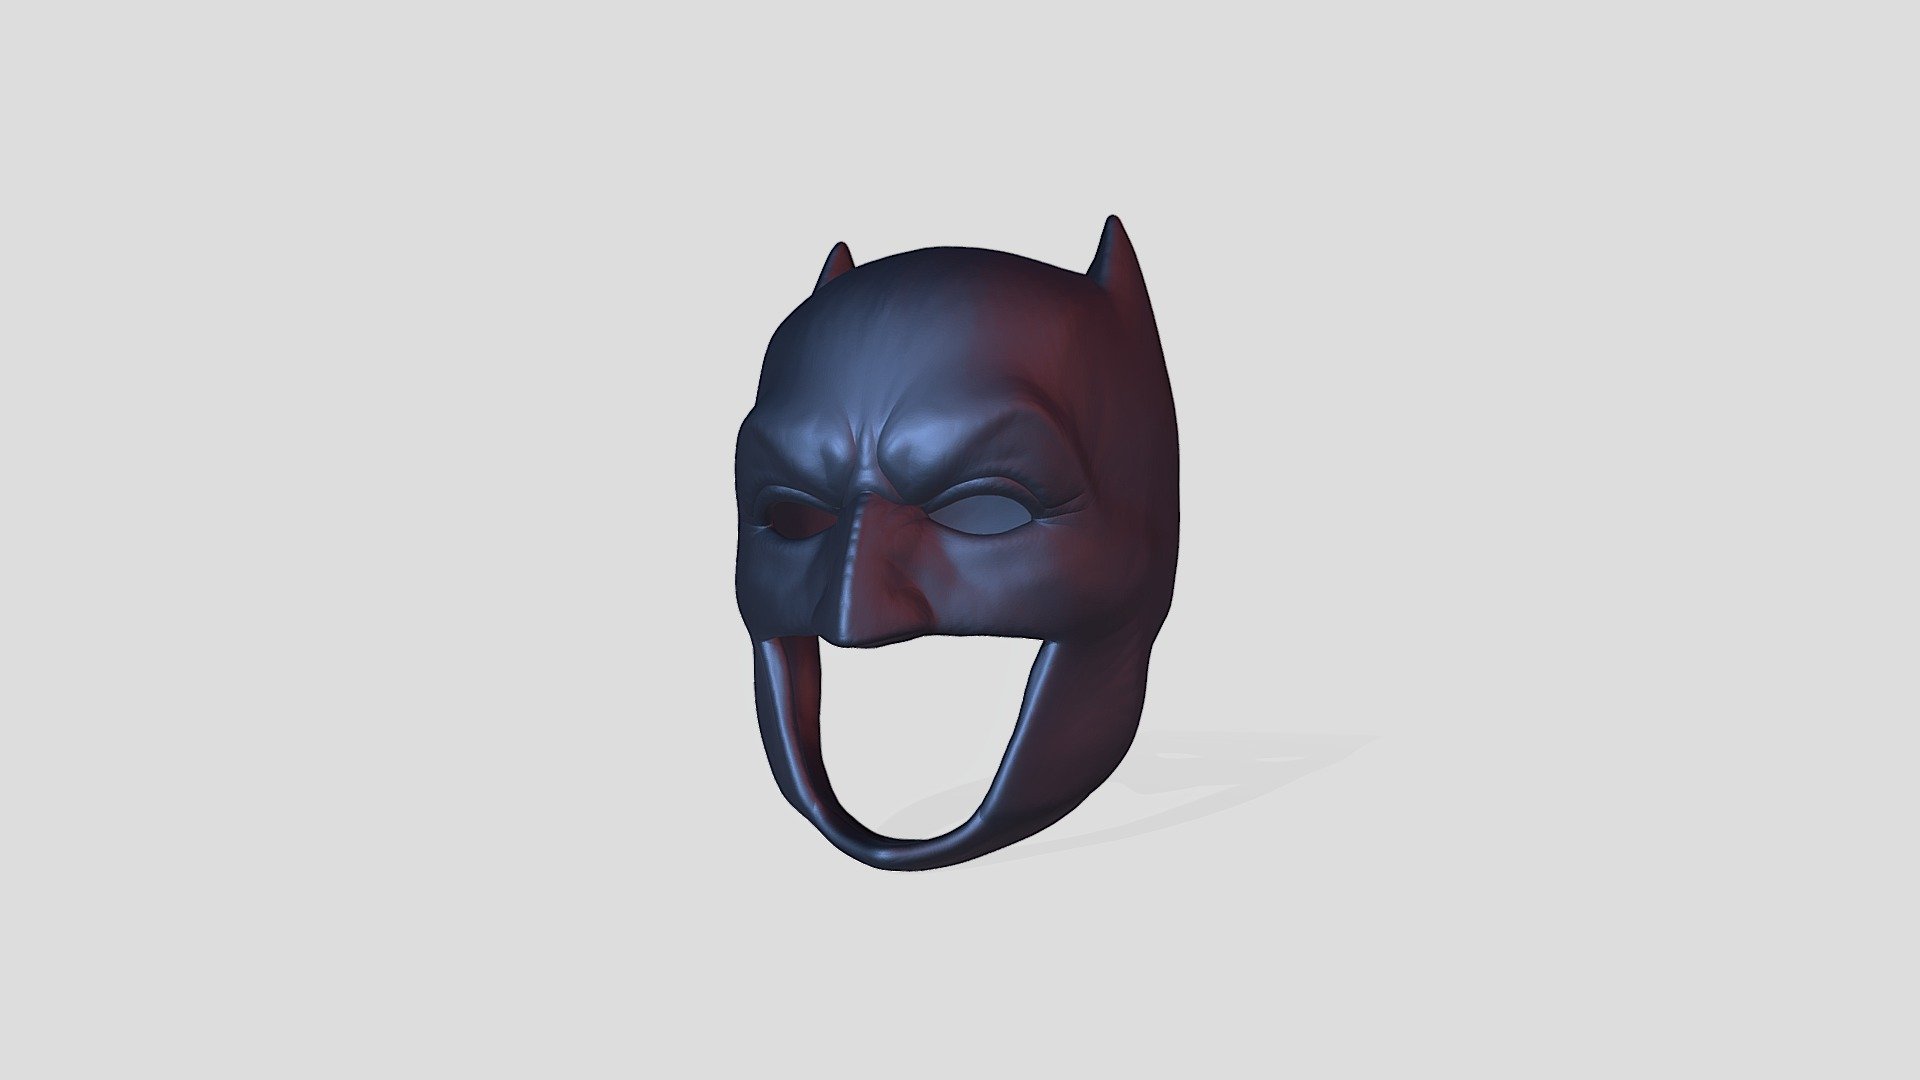 This is the Batman cowl from Batman vs Superman &amp; Justice League

You can download it for FREE ! - BATMAN COWL - Download Free 3D model by MaxTht (@thetiot.maxime) 3d model